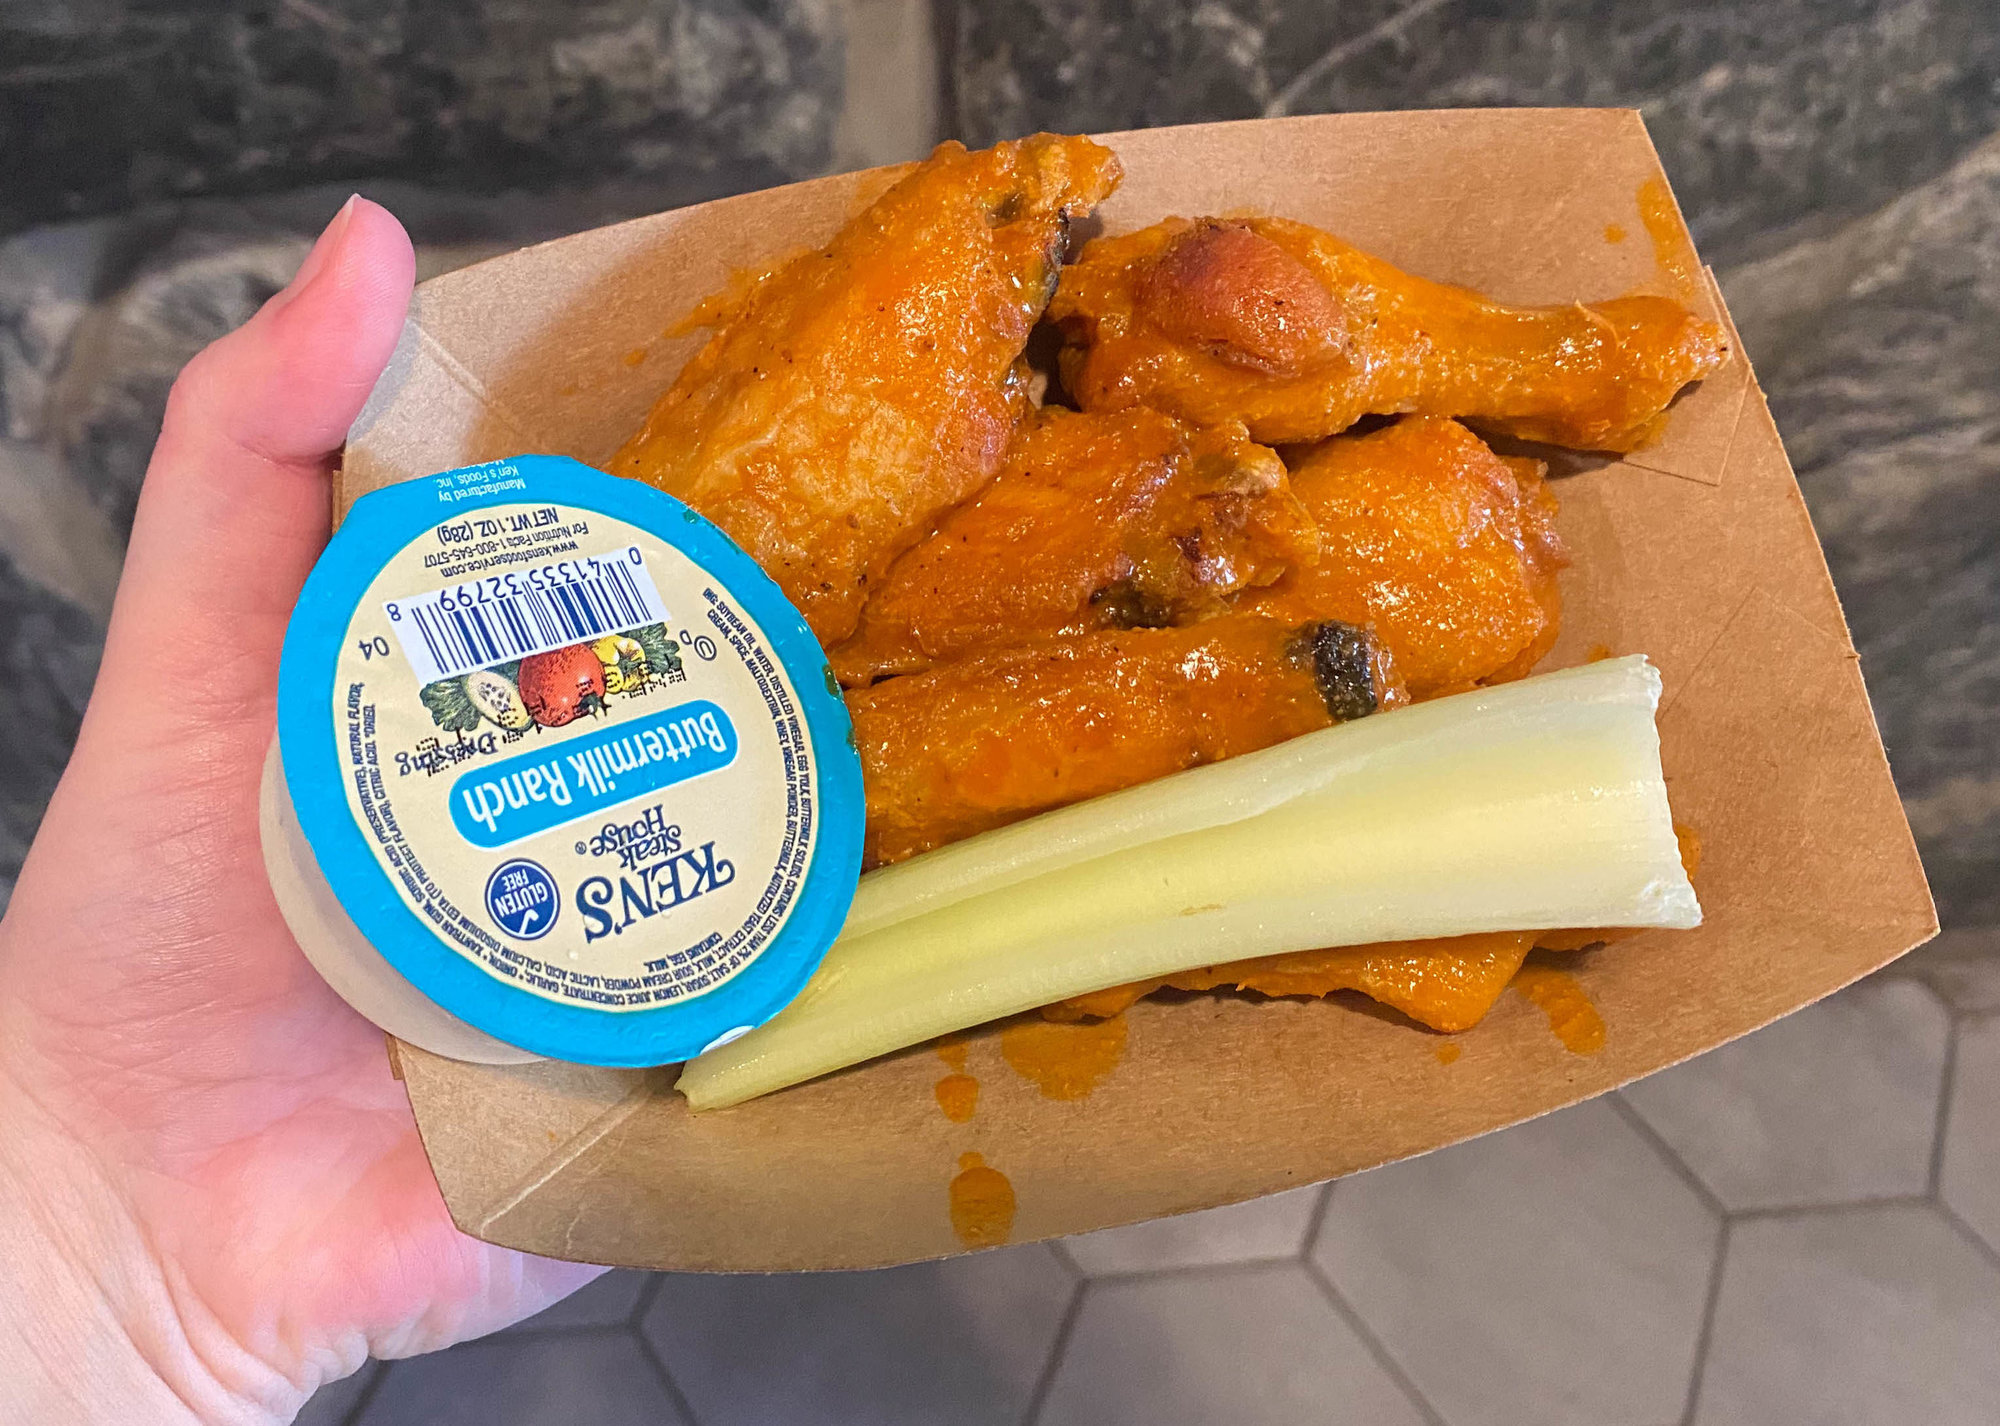 buffalo wings with celery and a blue cheese dip in a brown container